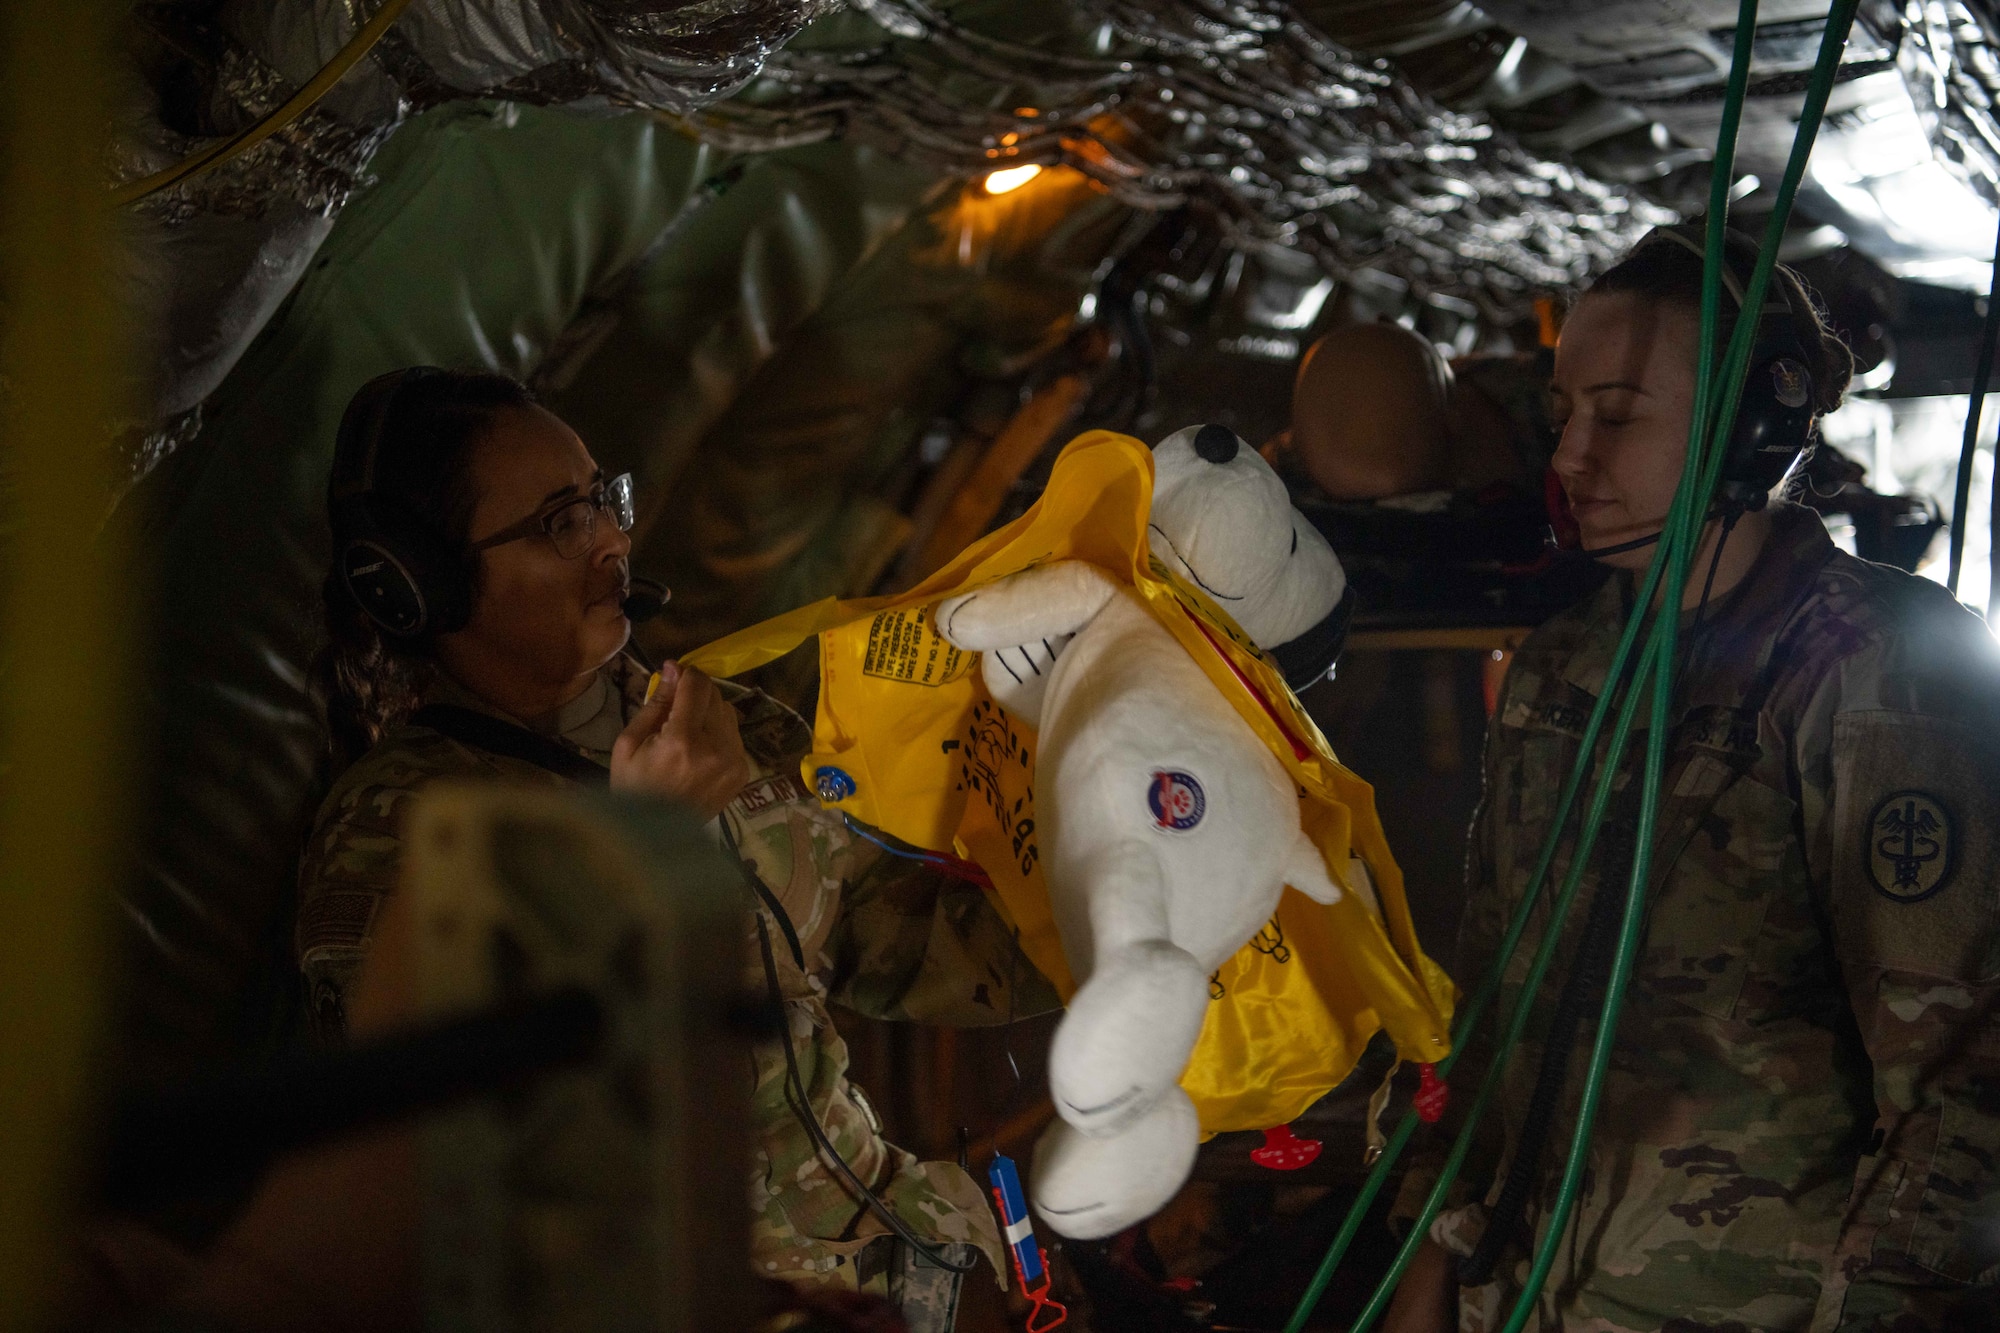 An Airman practices putting a life vest on a stuffed animal simulating a military working dog.